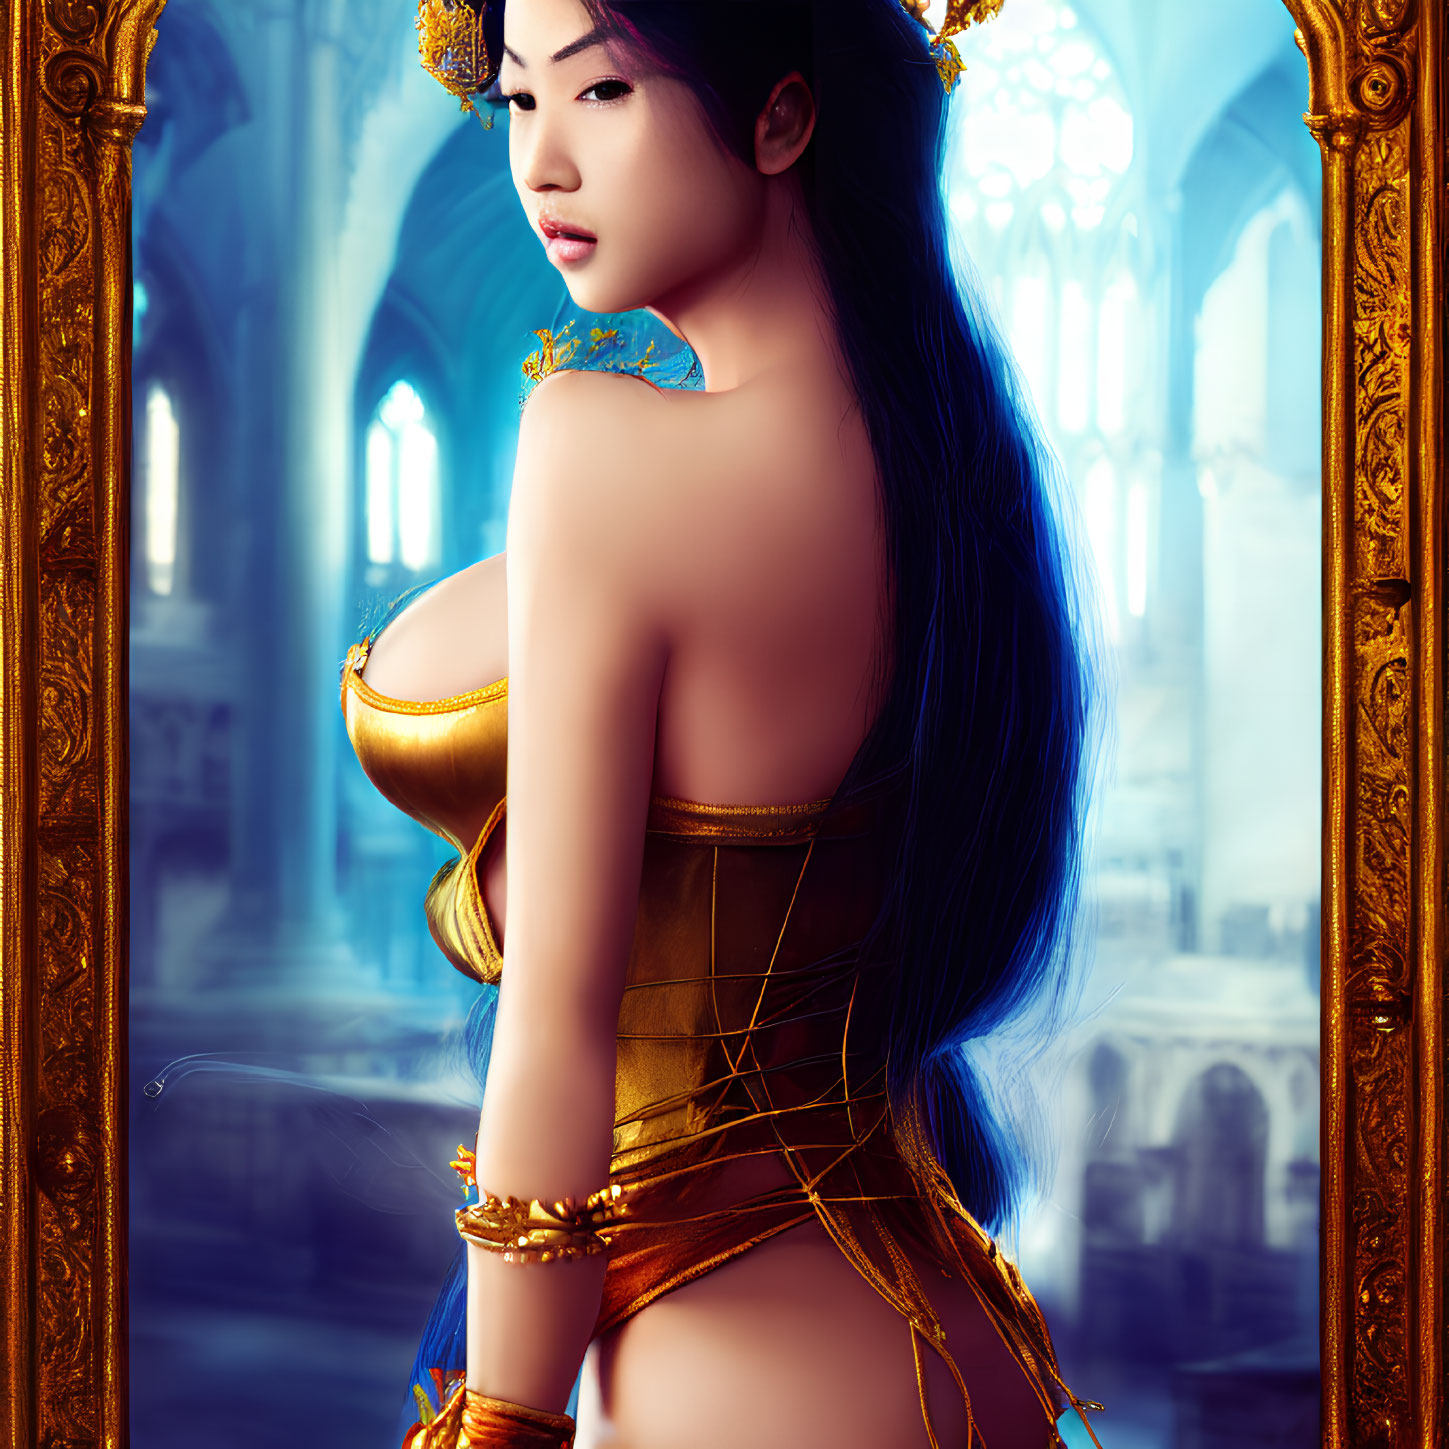 Digital artwork of a woman in ornate gold and blue attire in a fantasy setting